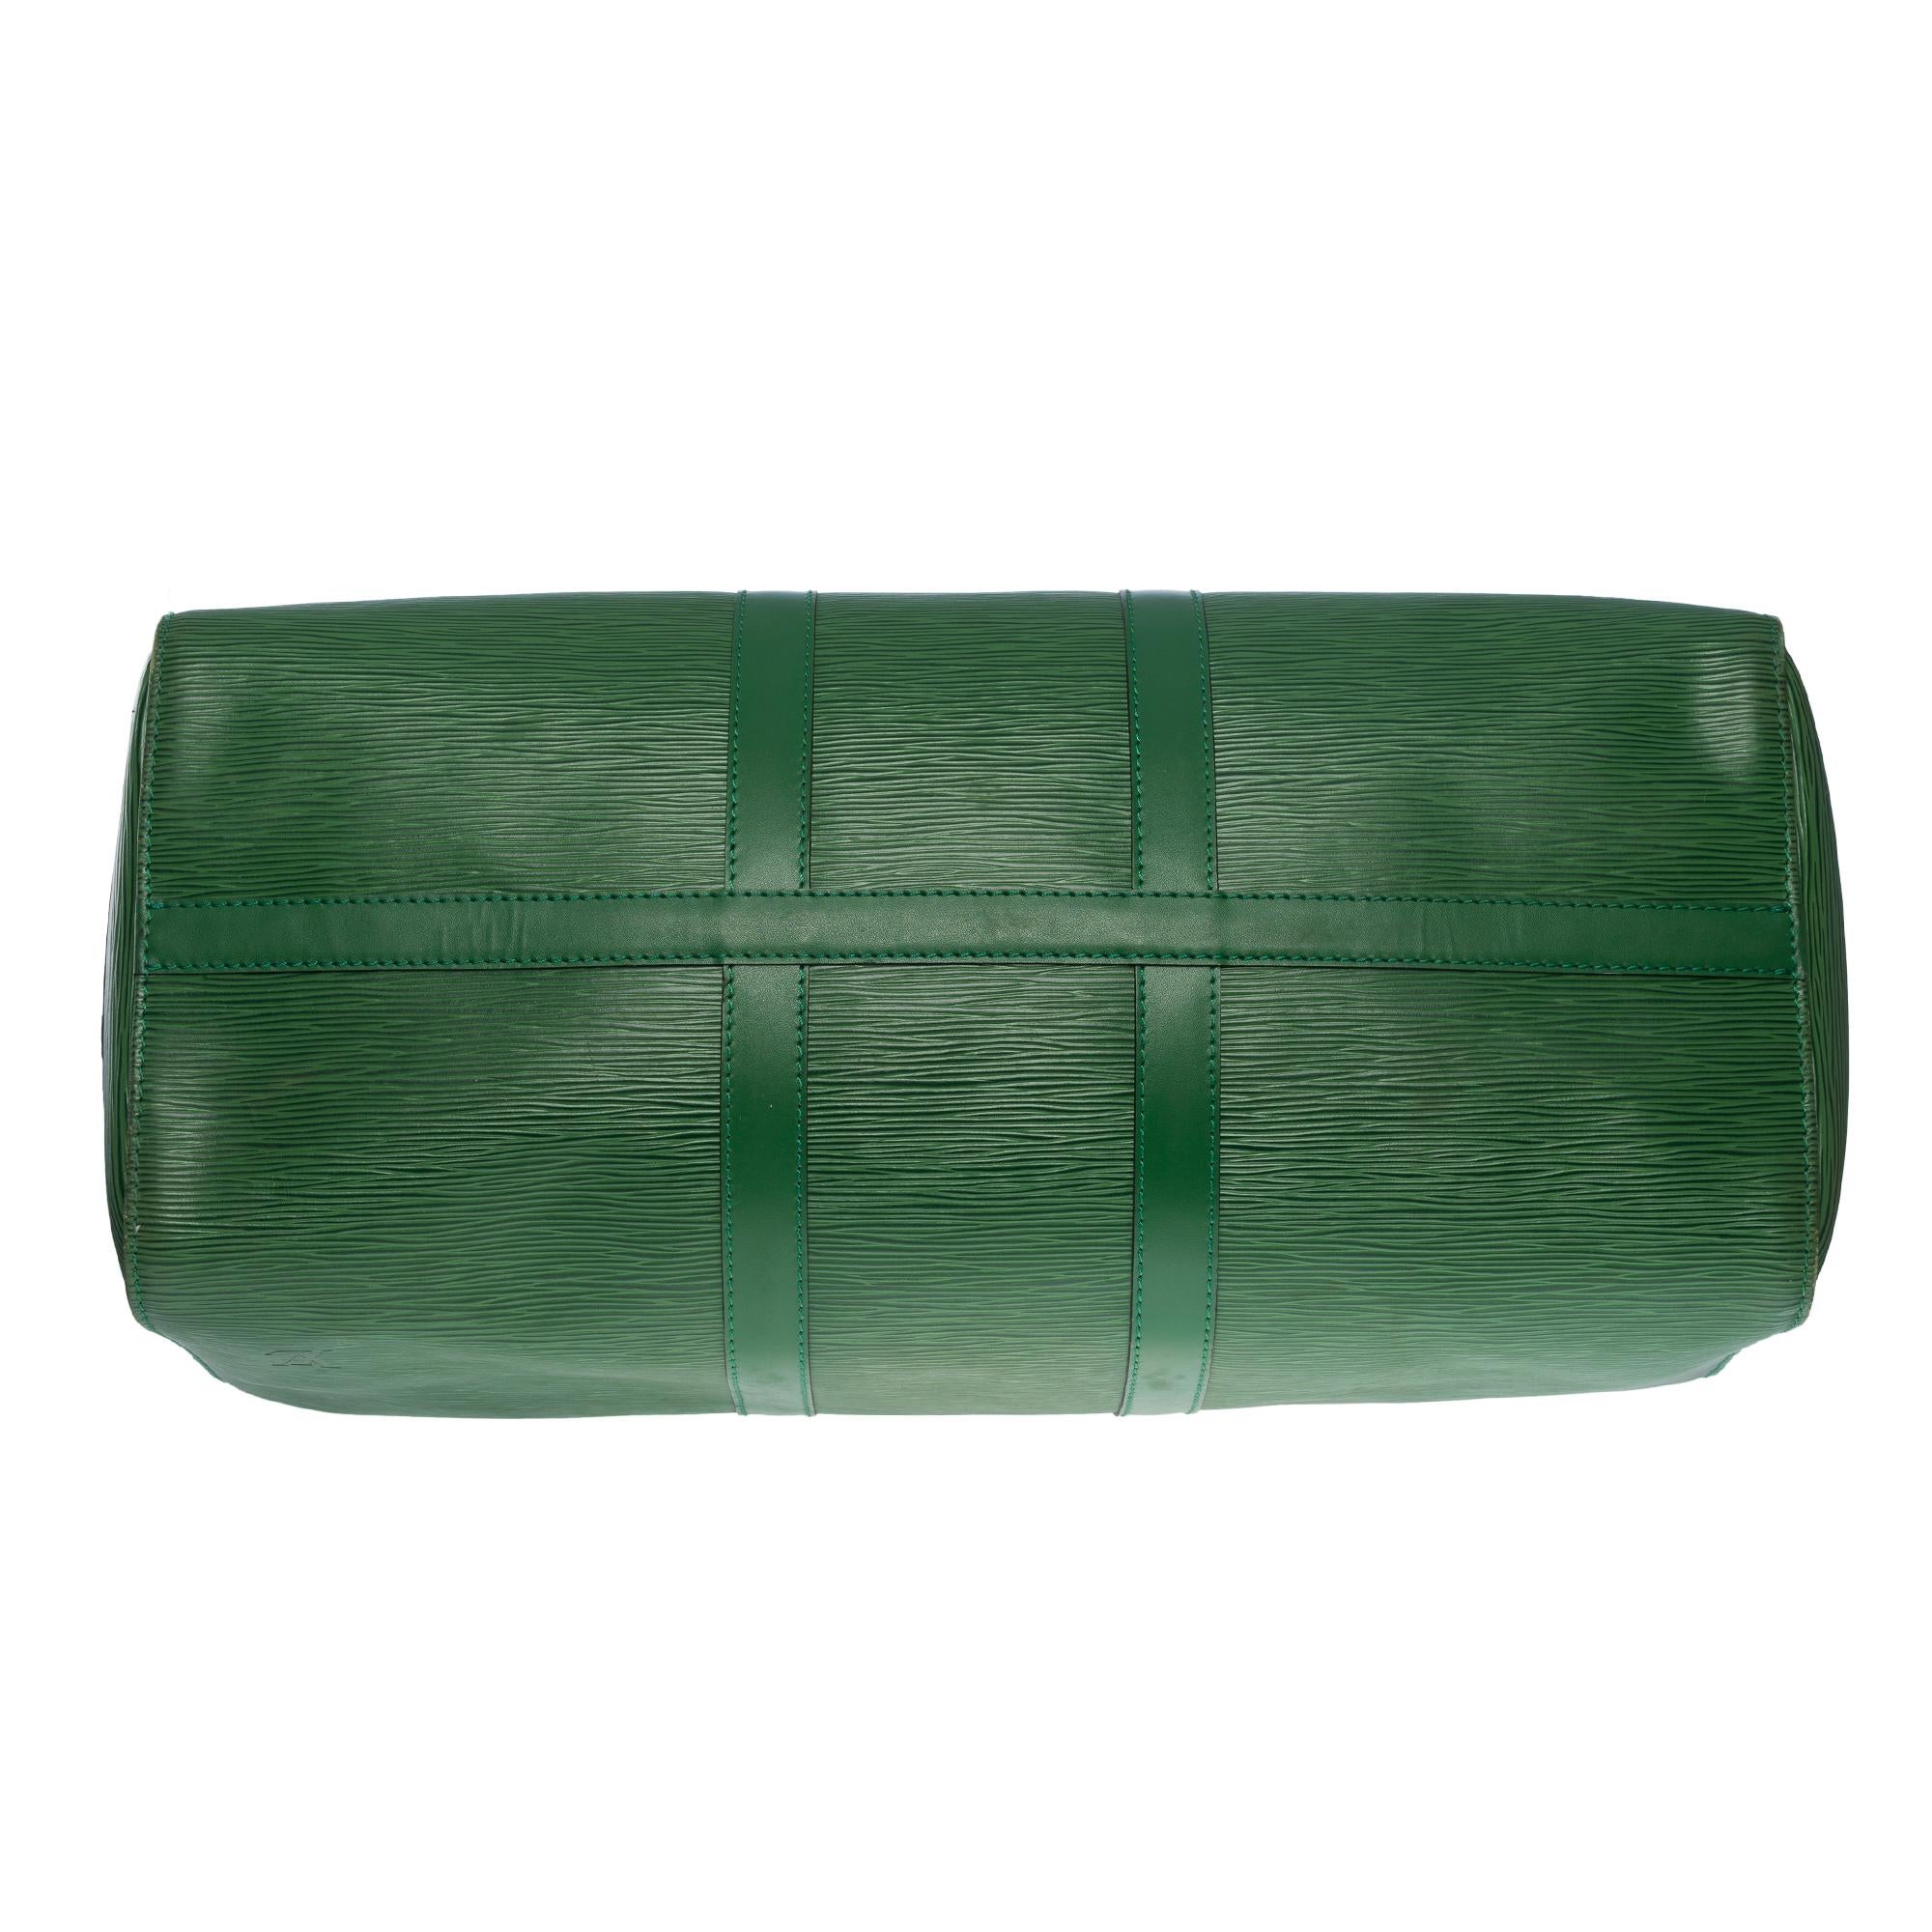 The very Chic Louis Vuitton Keepall 45 Travel bag in Green epi leather, GHW 5